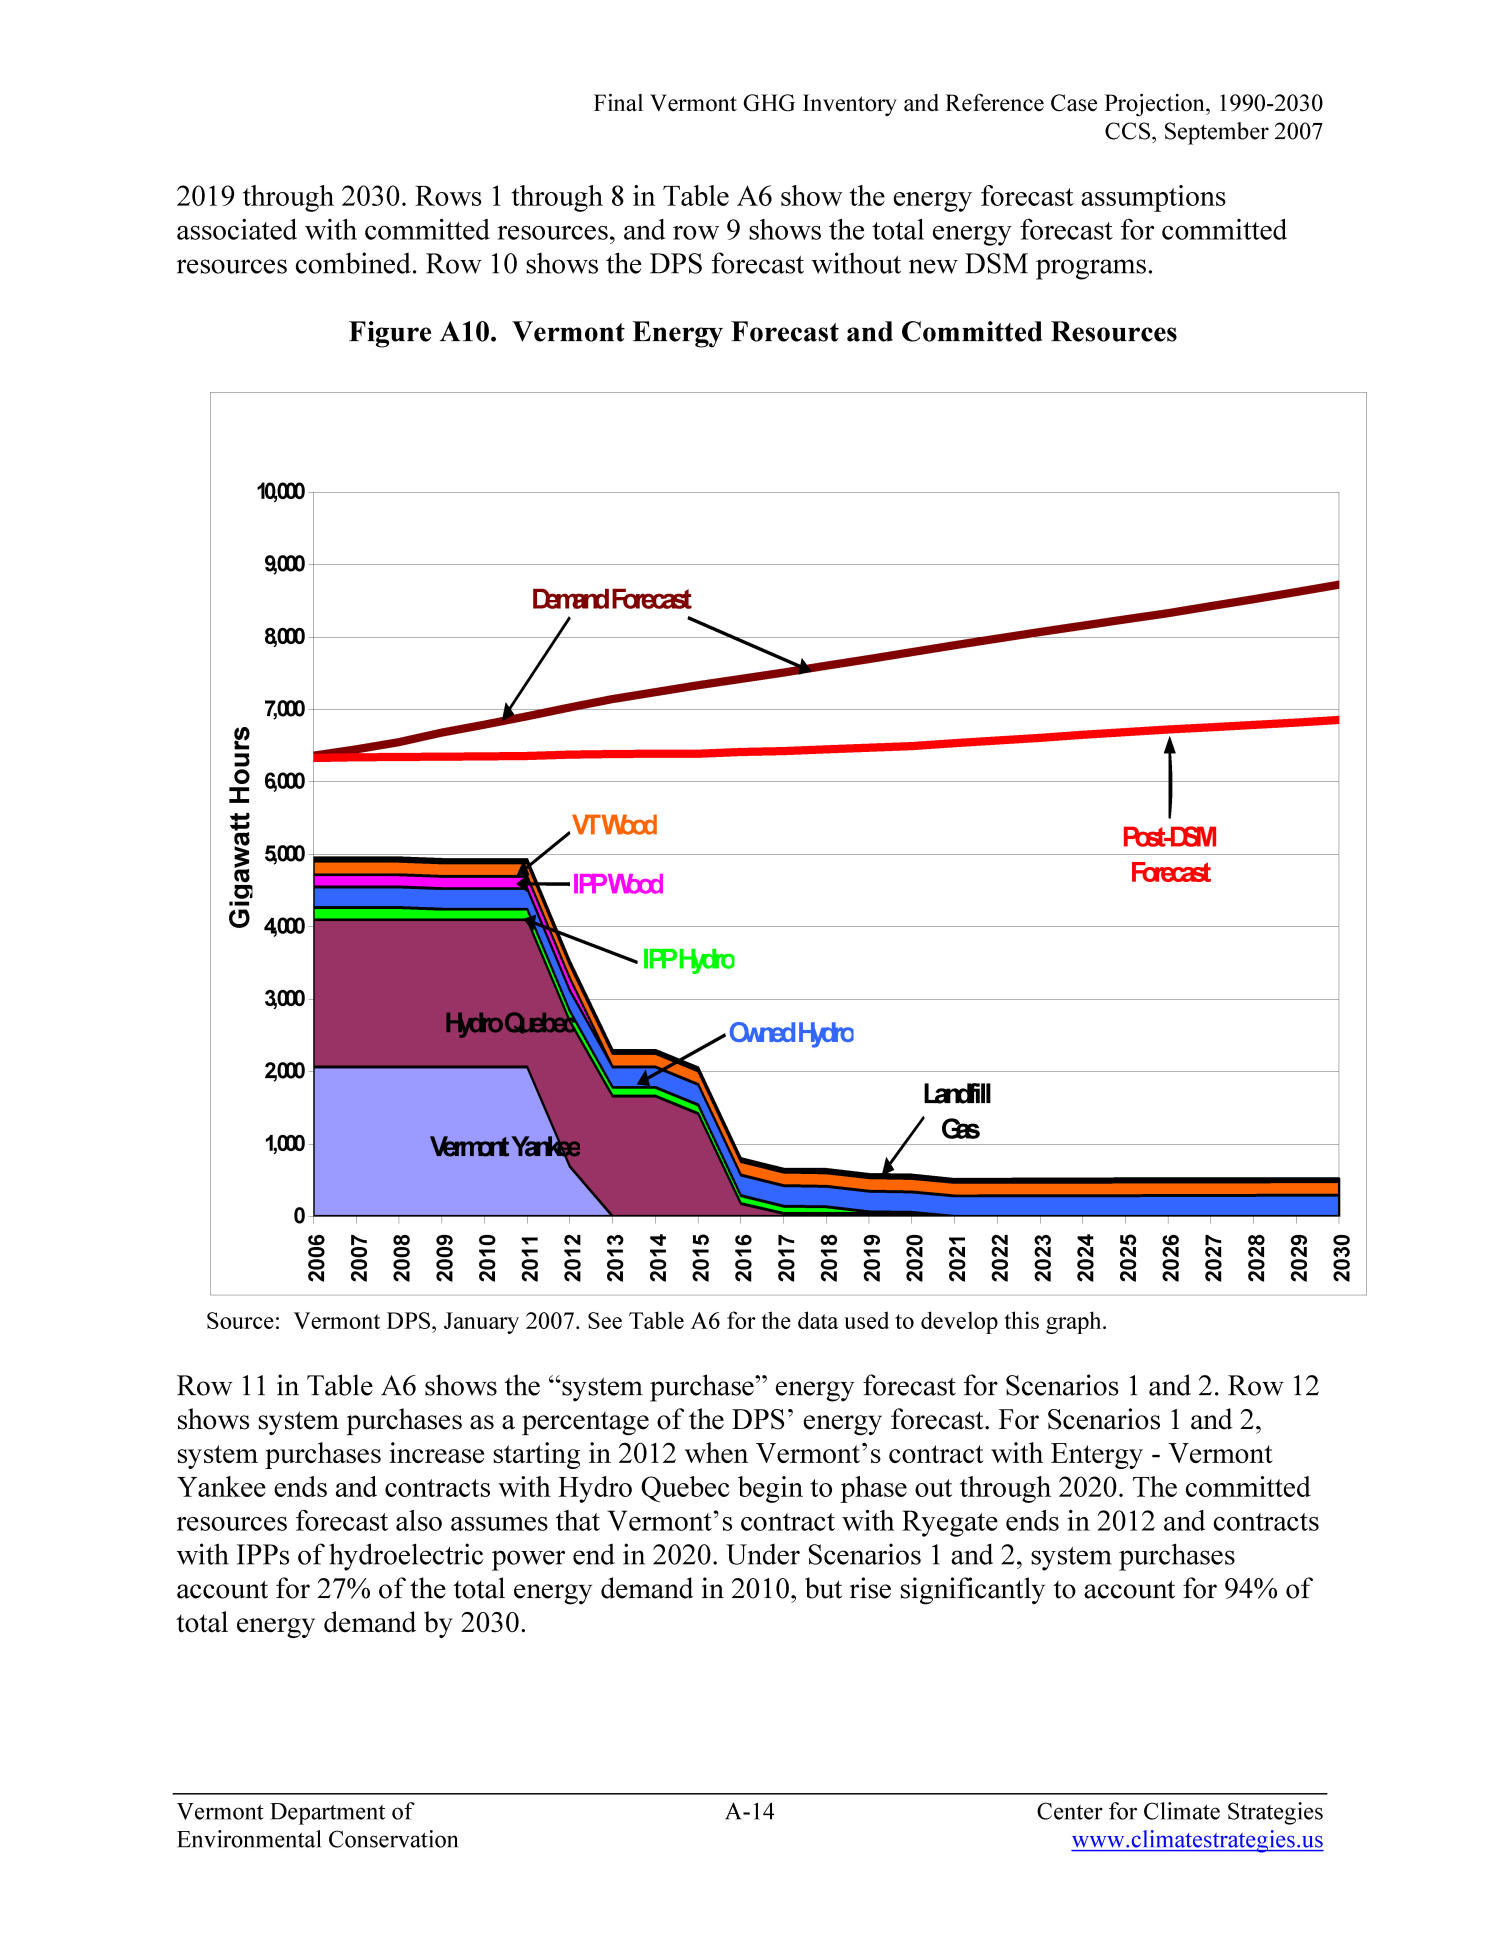 Final Vermont Greenhouse Gas Inventory and Reference Case Projections, 1990-2030
                                                
                                                    14
                                                